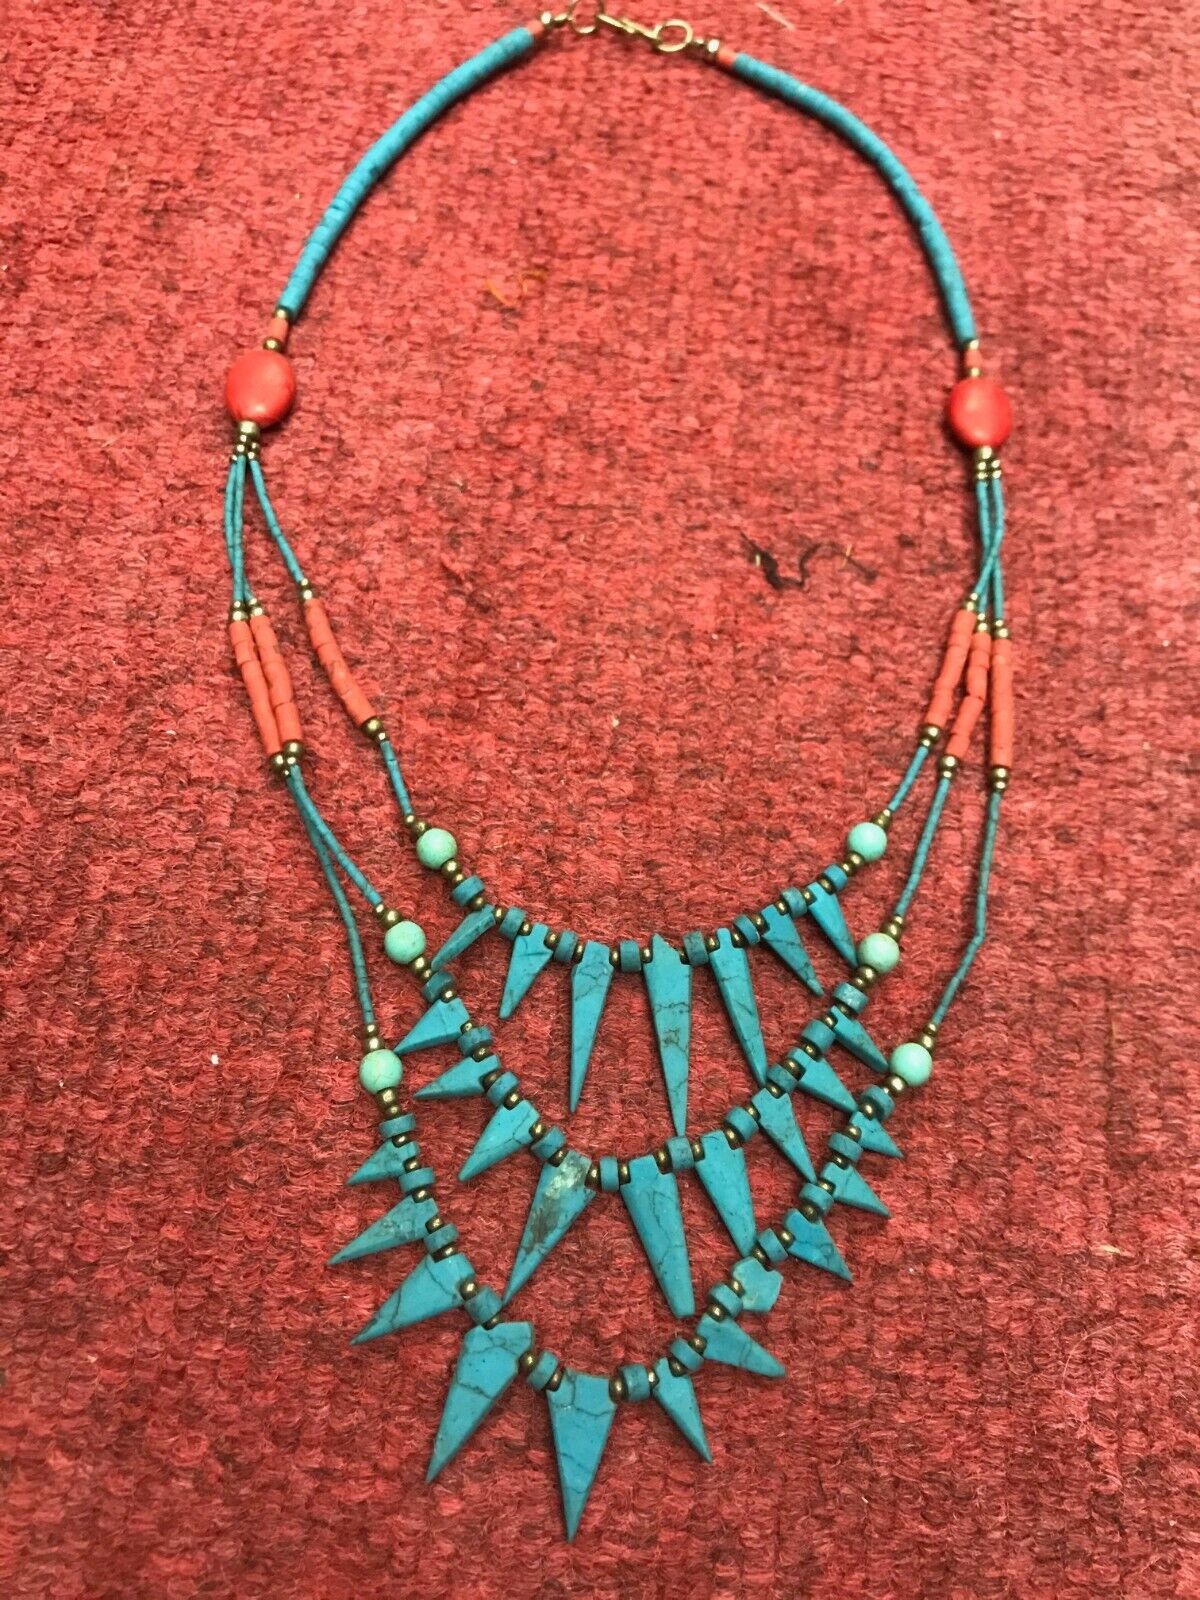 Rare Art viking Nation Turquoise Coral Collar Beads Necklace Mens Women